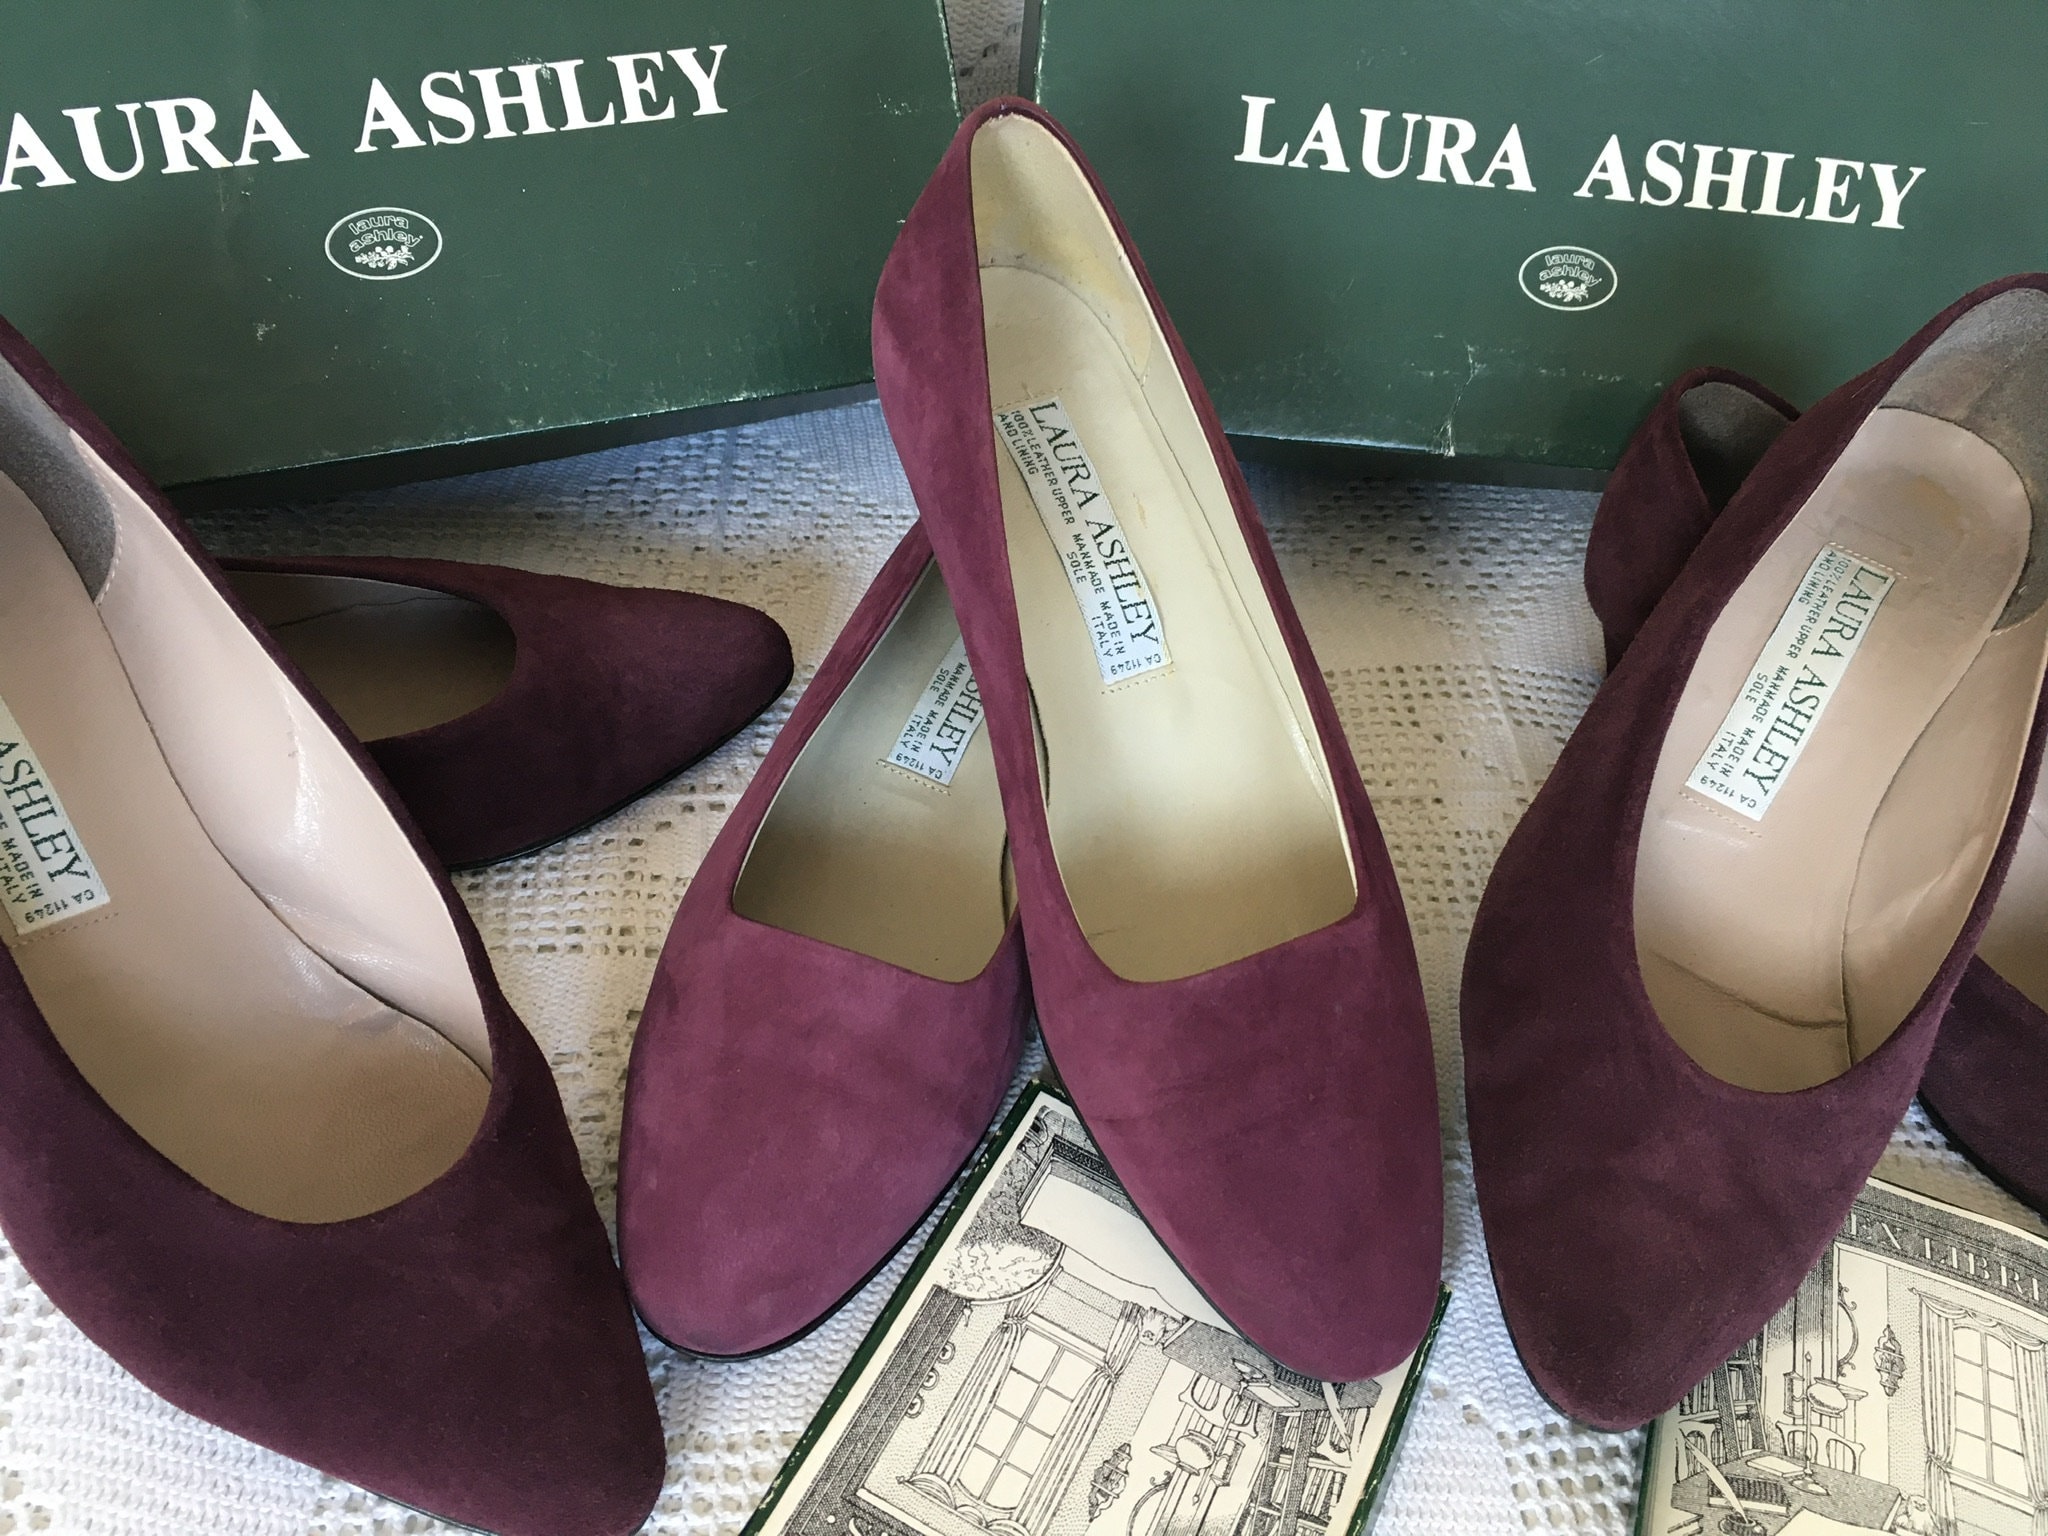 Embroidered Cof Suede Leather Pump Flat Ballerina New Shoes Womens Shoes Pumps Size EU 36 UK 3 Laura Ashley Vintage 